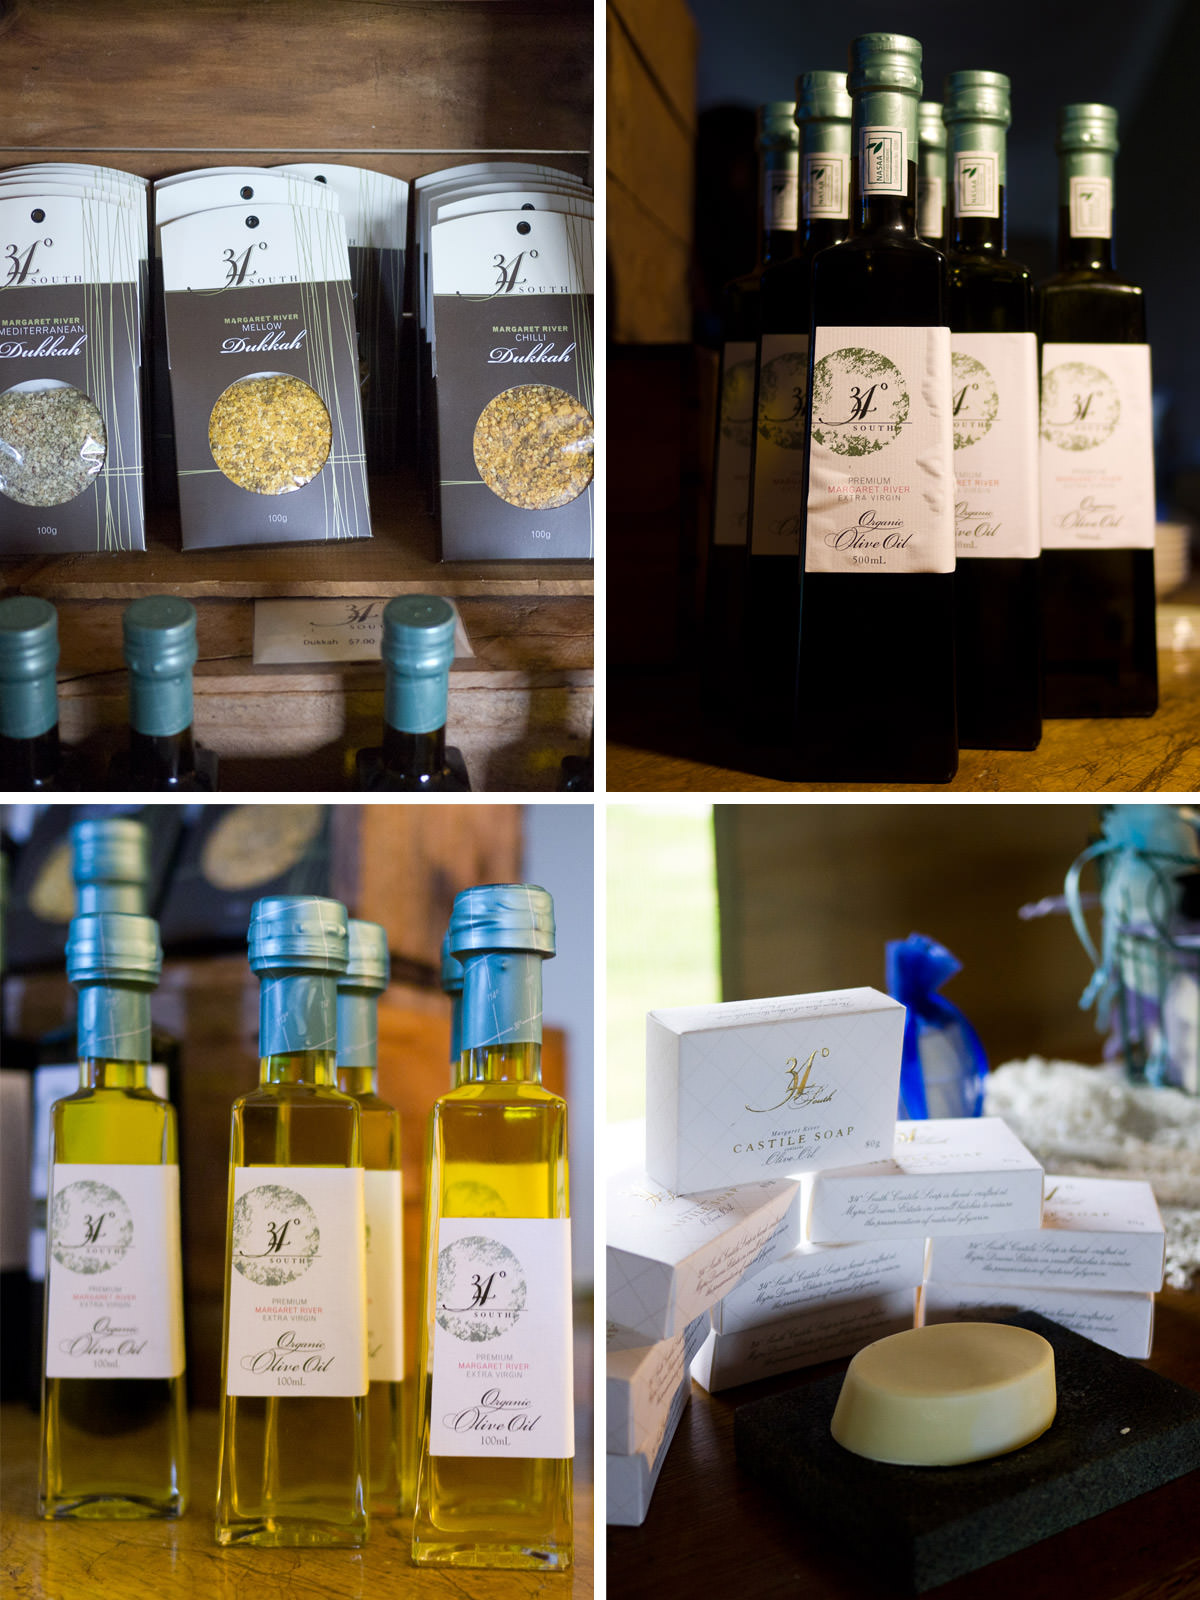 34 Degrees South olive oil products